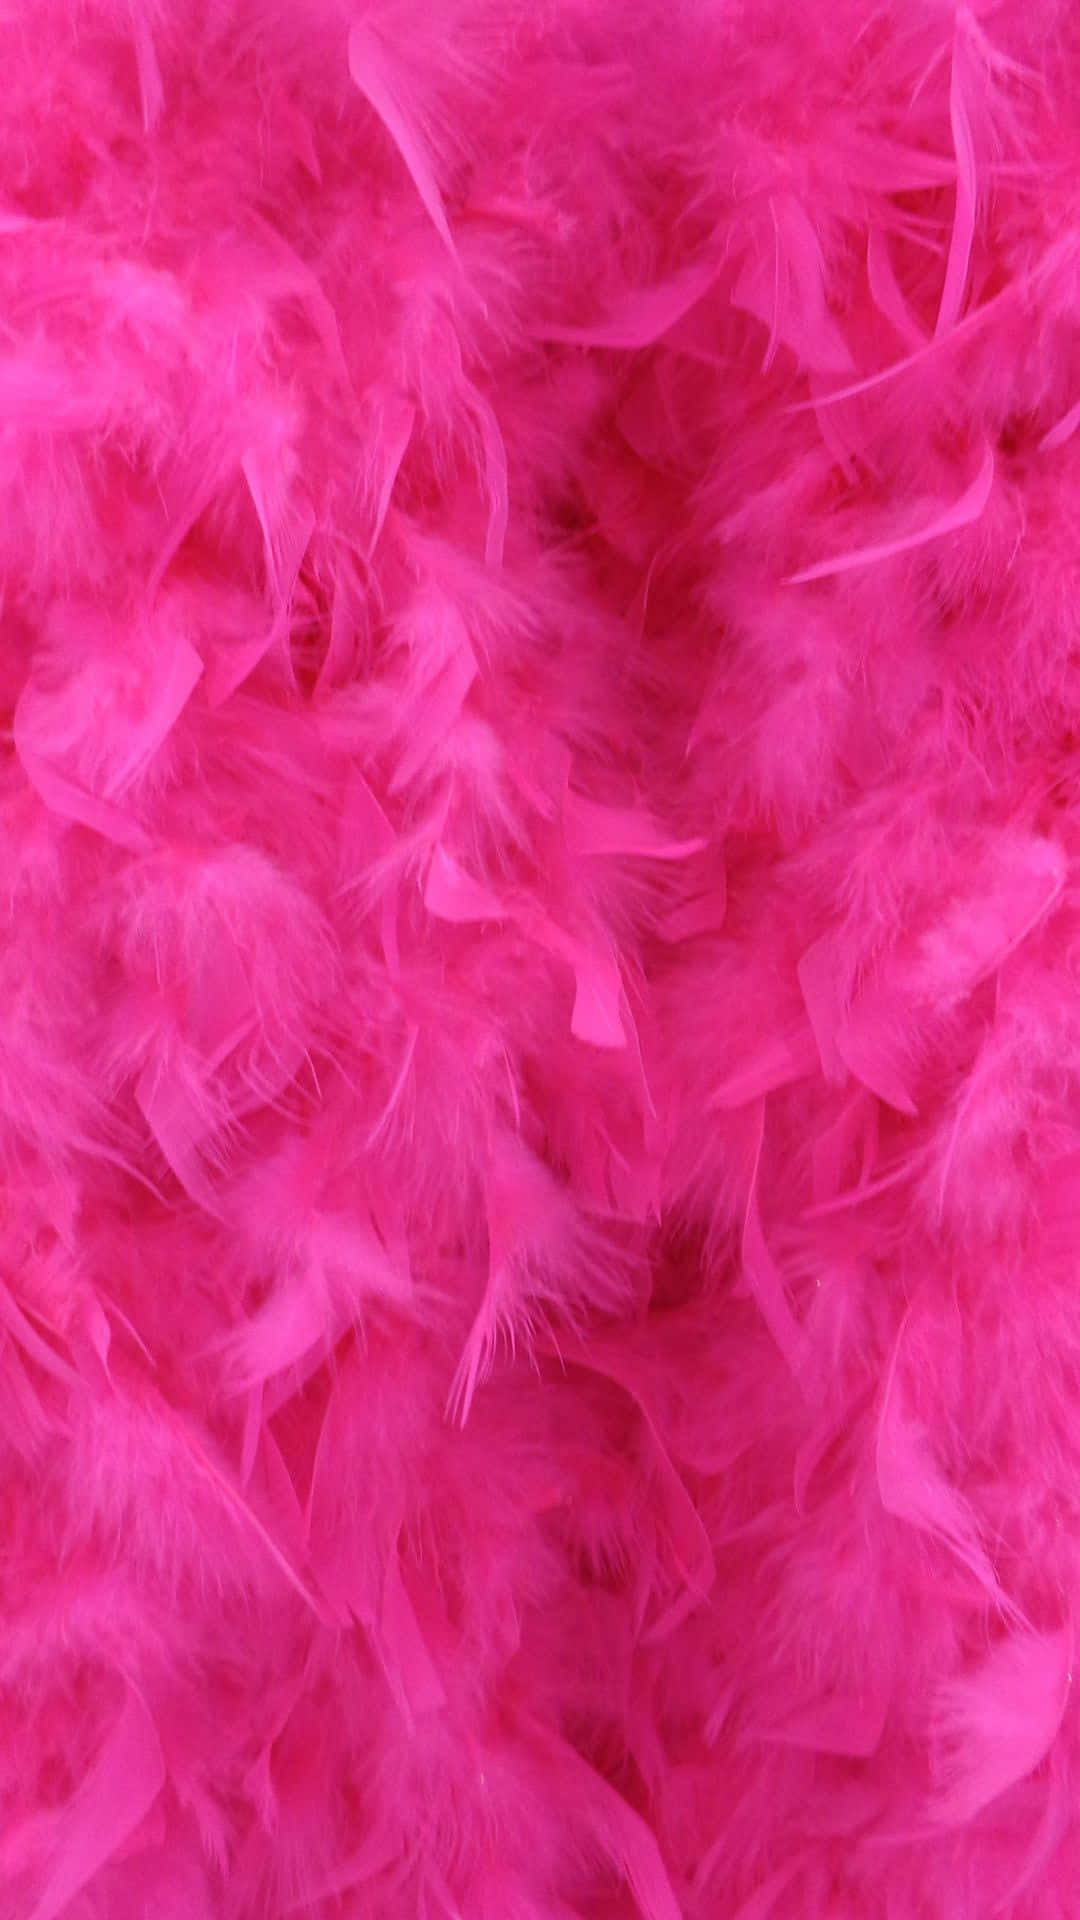 A Close Up Of A Pink Feather